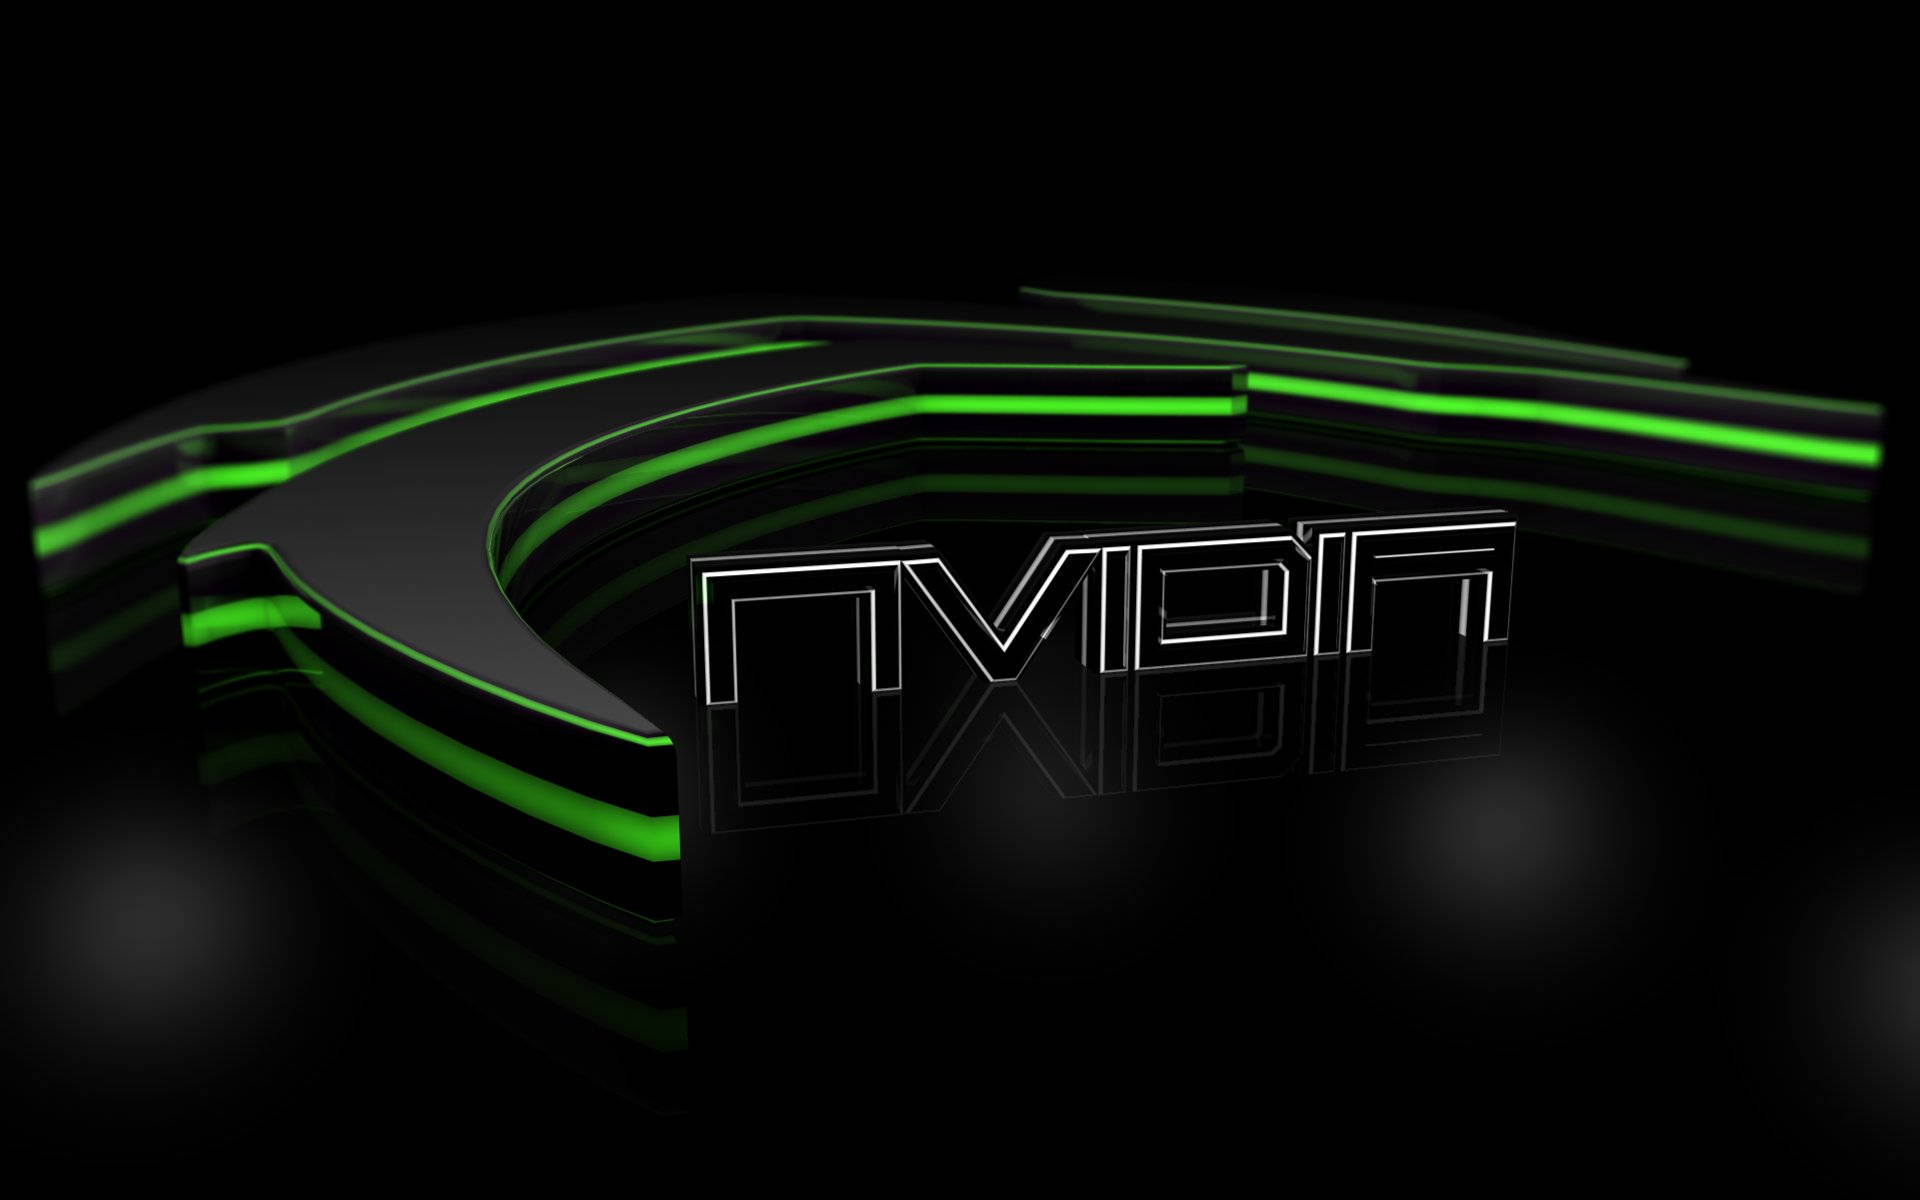 Nvidia 1920X1200 Wallpaper and Background Image